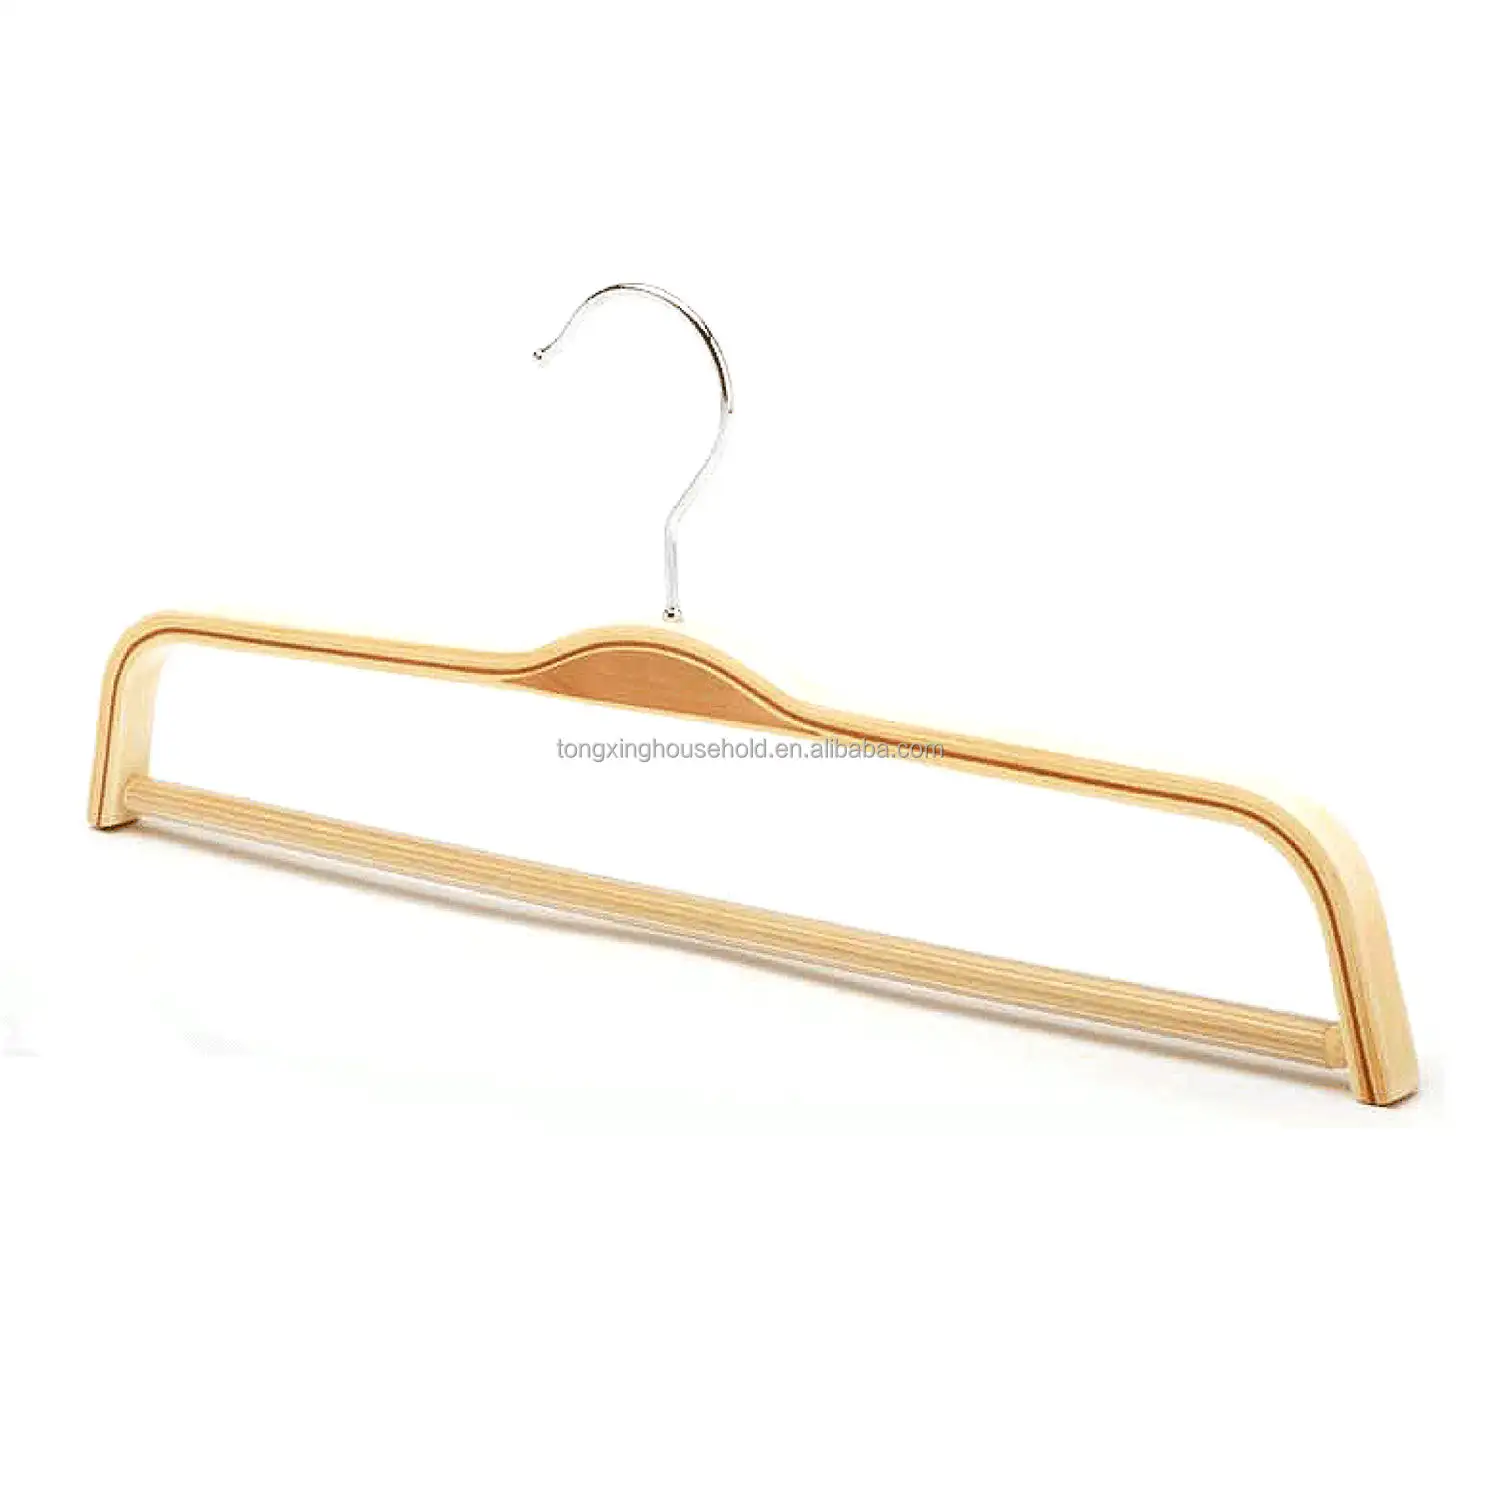 LEEKING Hot selling adult suit pants rack wooden clothes hanger with anti-slip bar